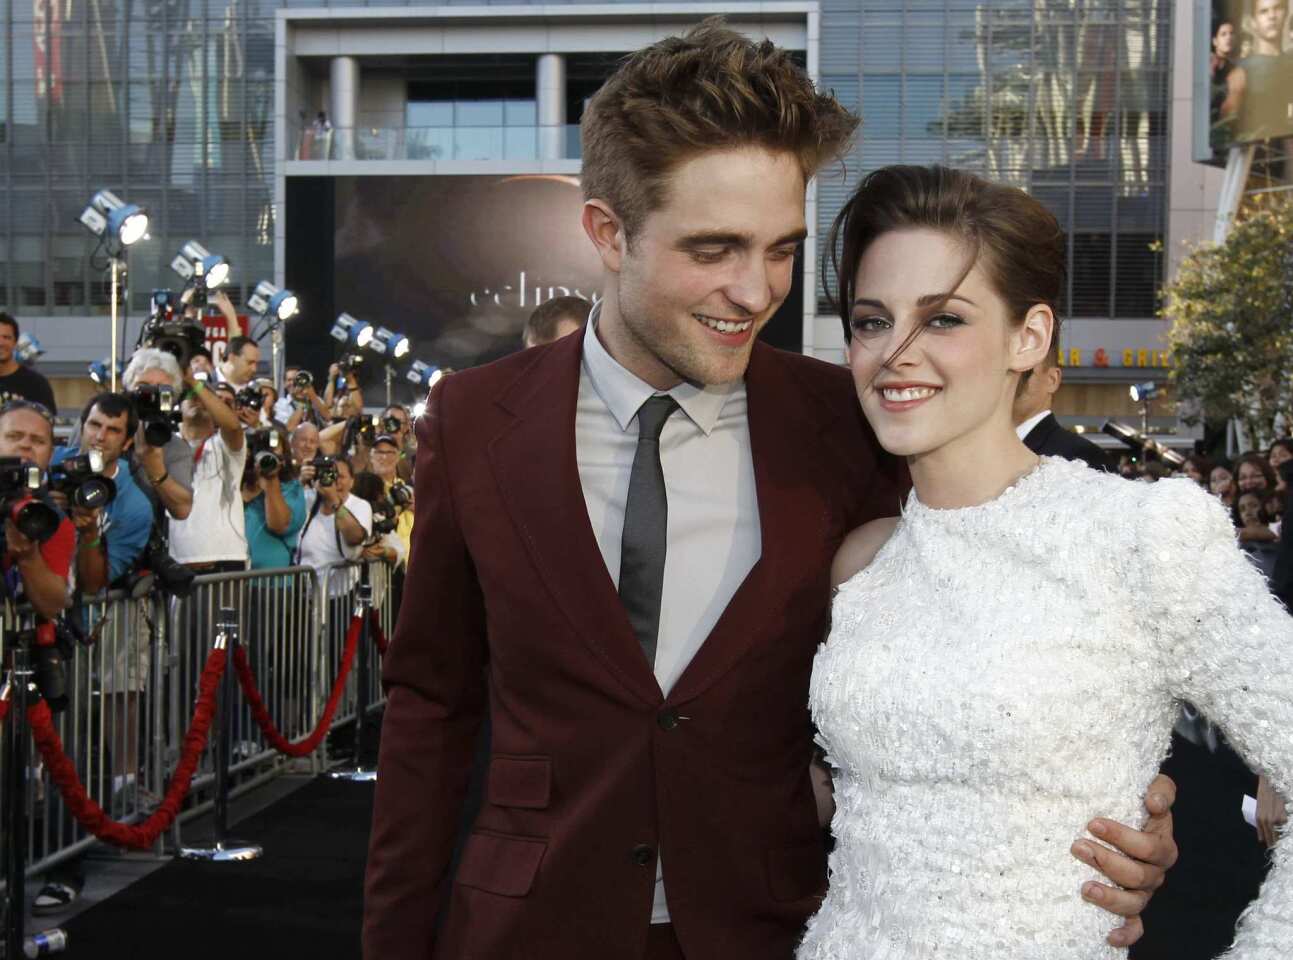 "Eclipse" premieres to dizzying fanfare in June 2010 with massive crowds in downtown Los Angeles. Success hadn't affected their relationship, nor their laid-back personalities. Rob and Kristen attended the after party as a couple, and Stewart even shook off her mini-dress for jeans and sneakers.